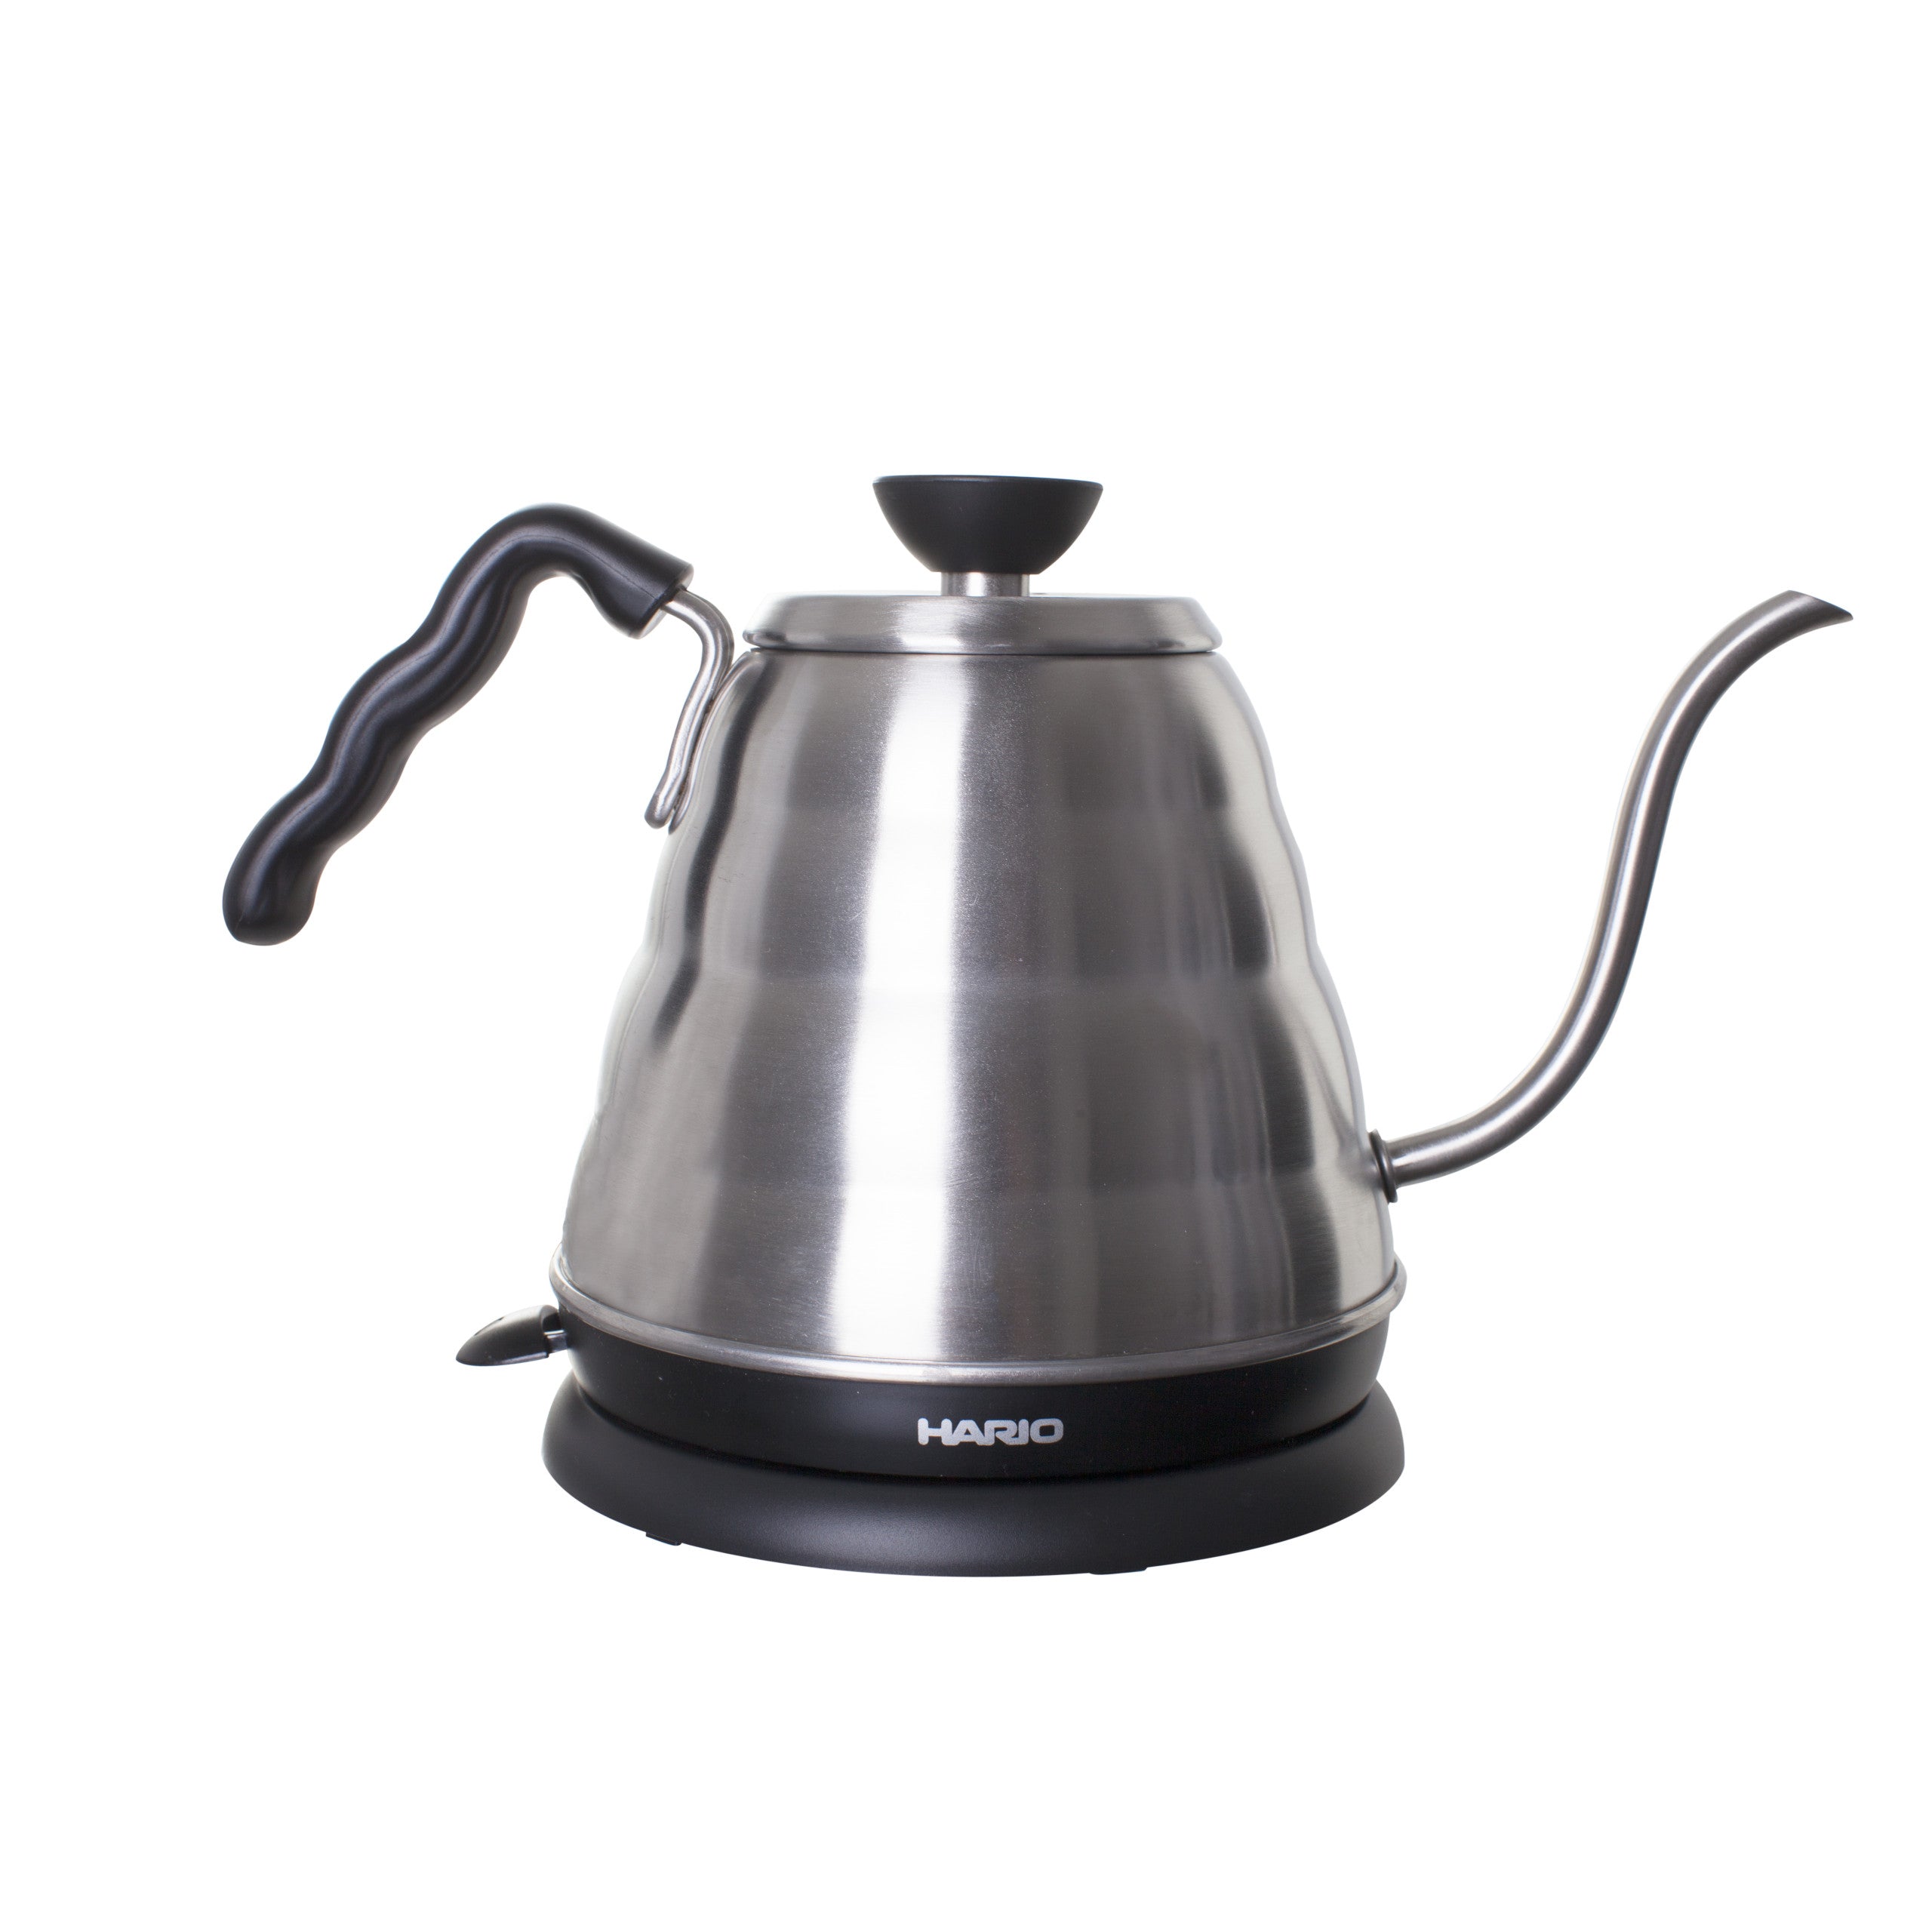 Hario Electric Kettle Review